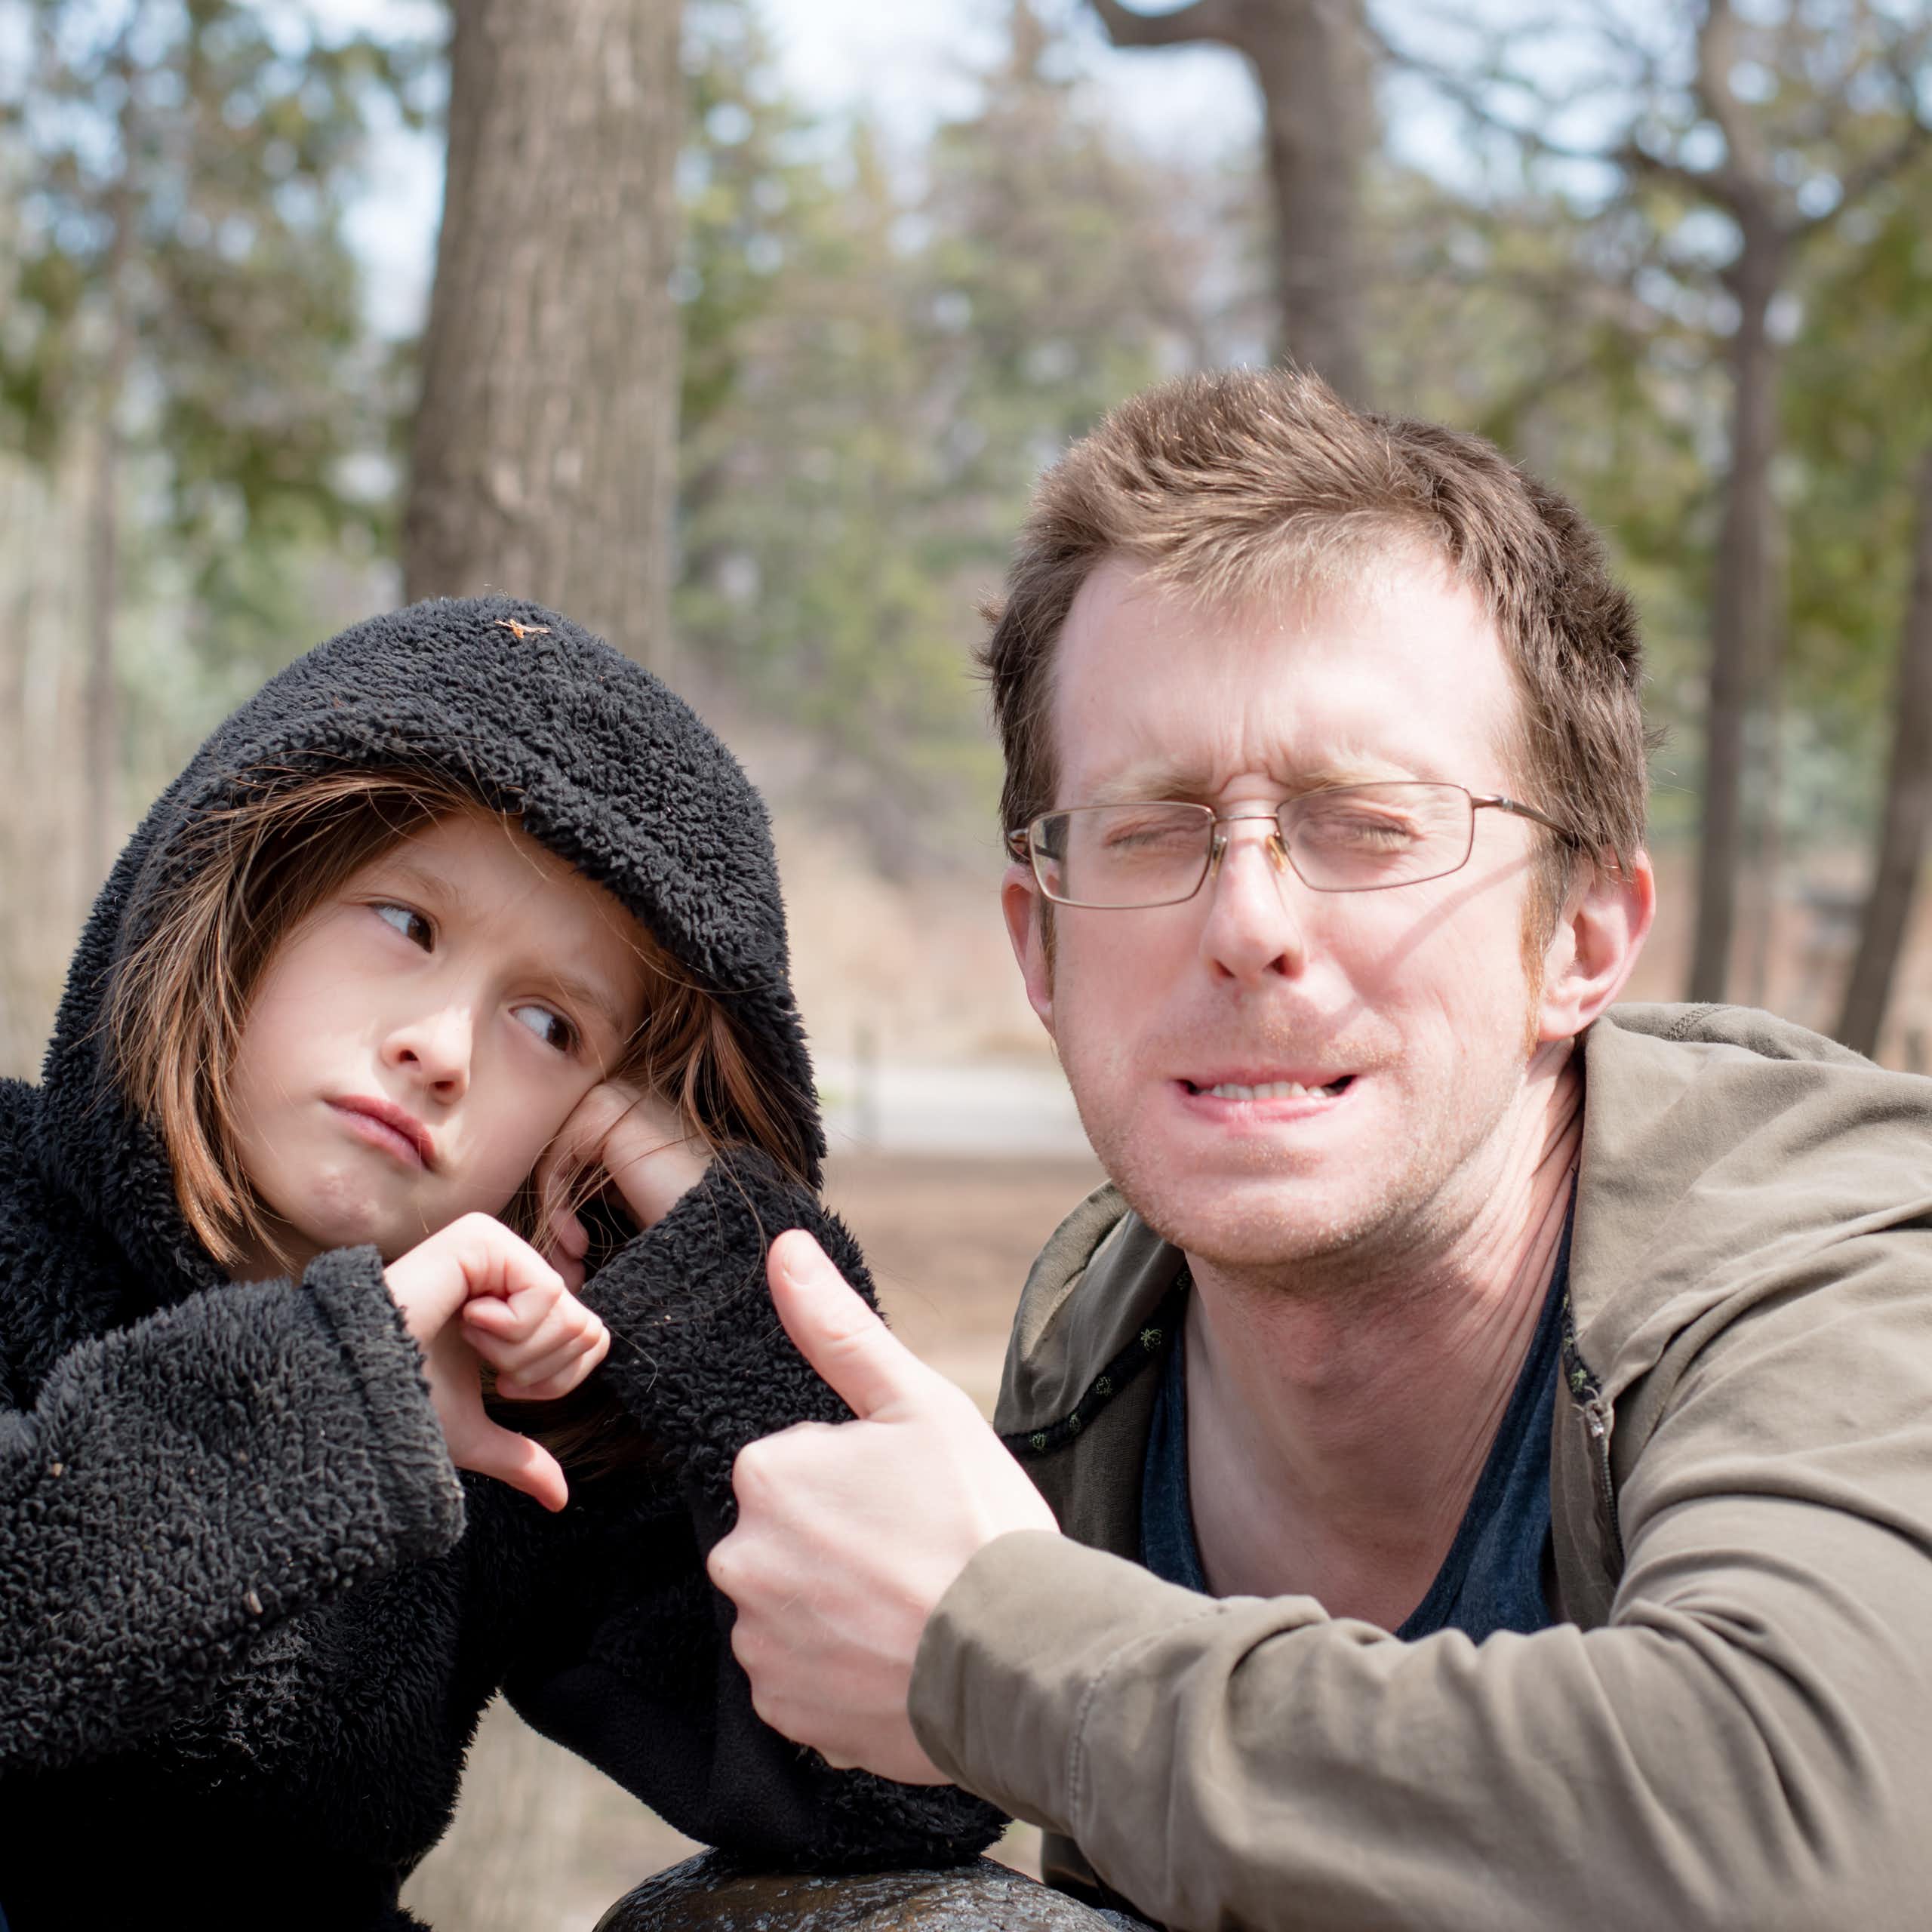 Young man squints, grimaces and makes a thumbs-up gesture while his young, glum-looking daughter looks at him disapprovingly.